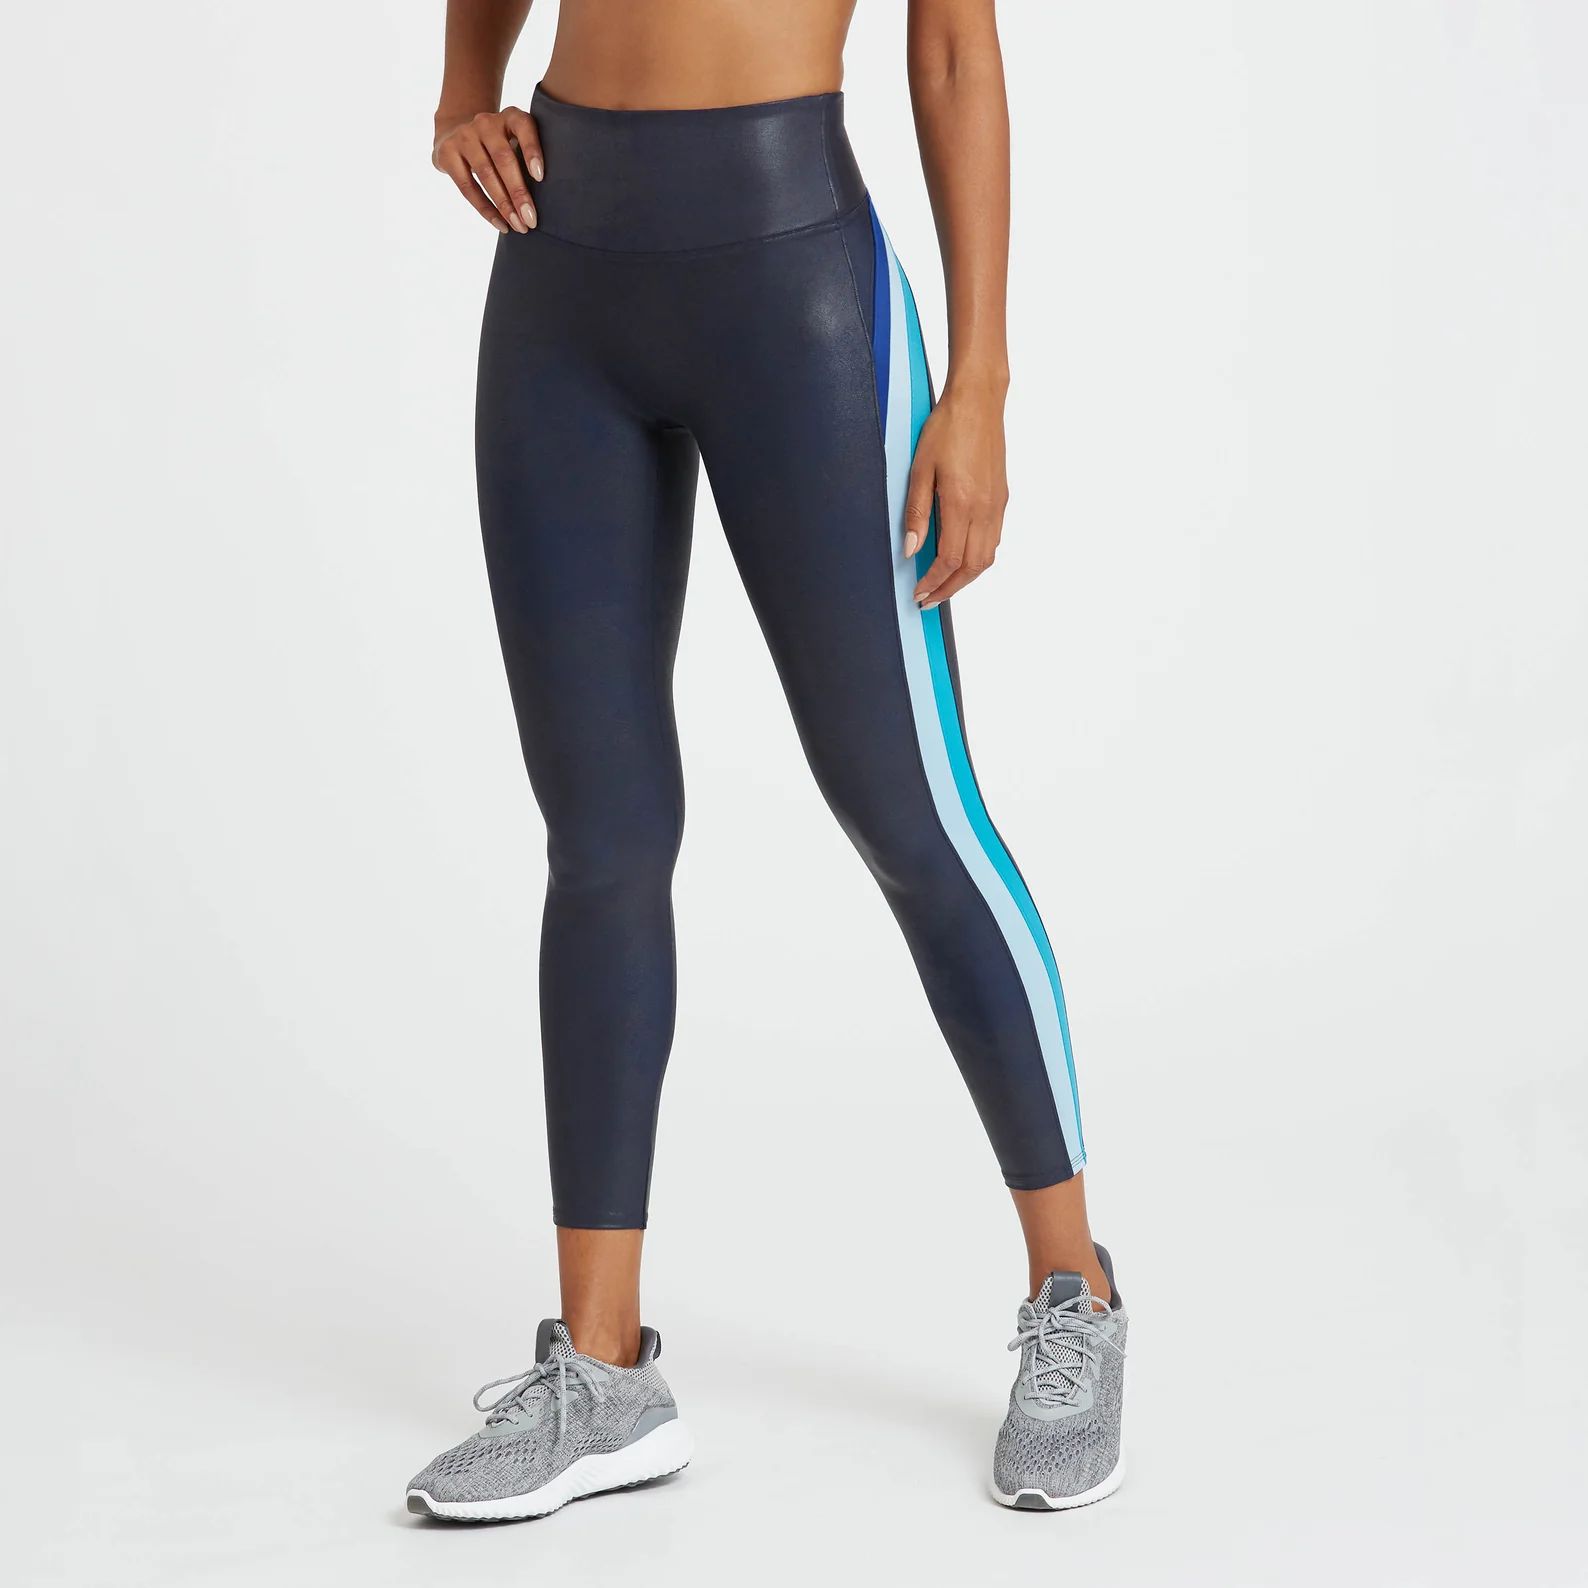 Faux Leather Track Stripe 7/8 Leggings
       is
        $77.00
       was
        $110.00 | Spanx